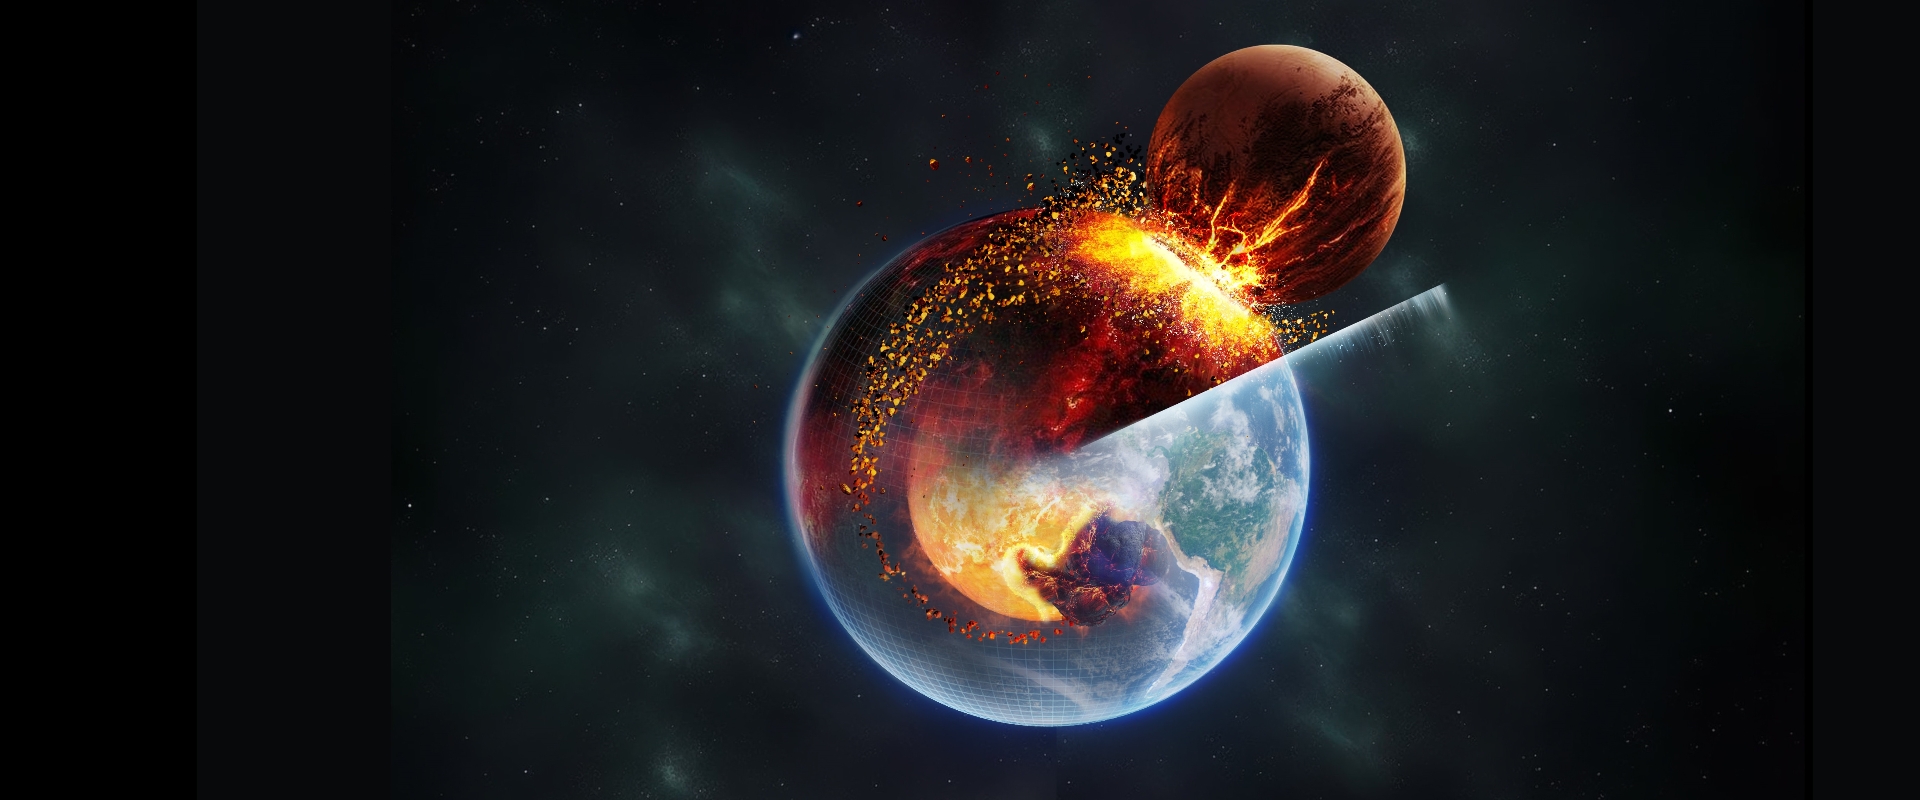 Heterogeneity of Earth's Mantle May Be Relics of Moon Formation